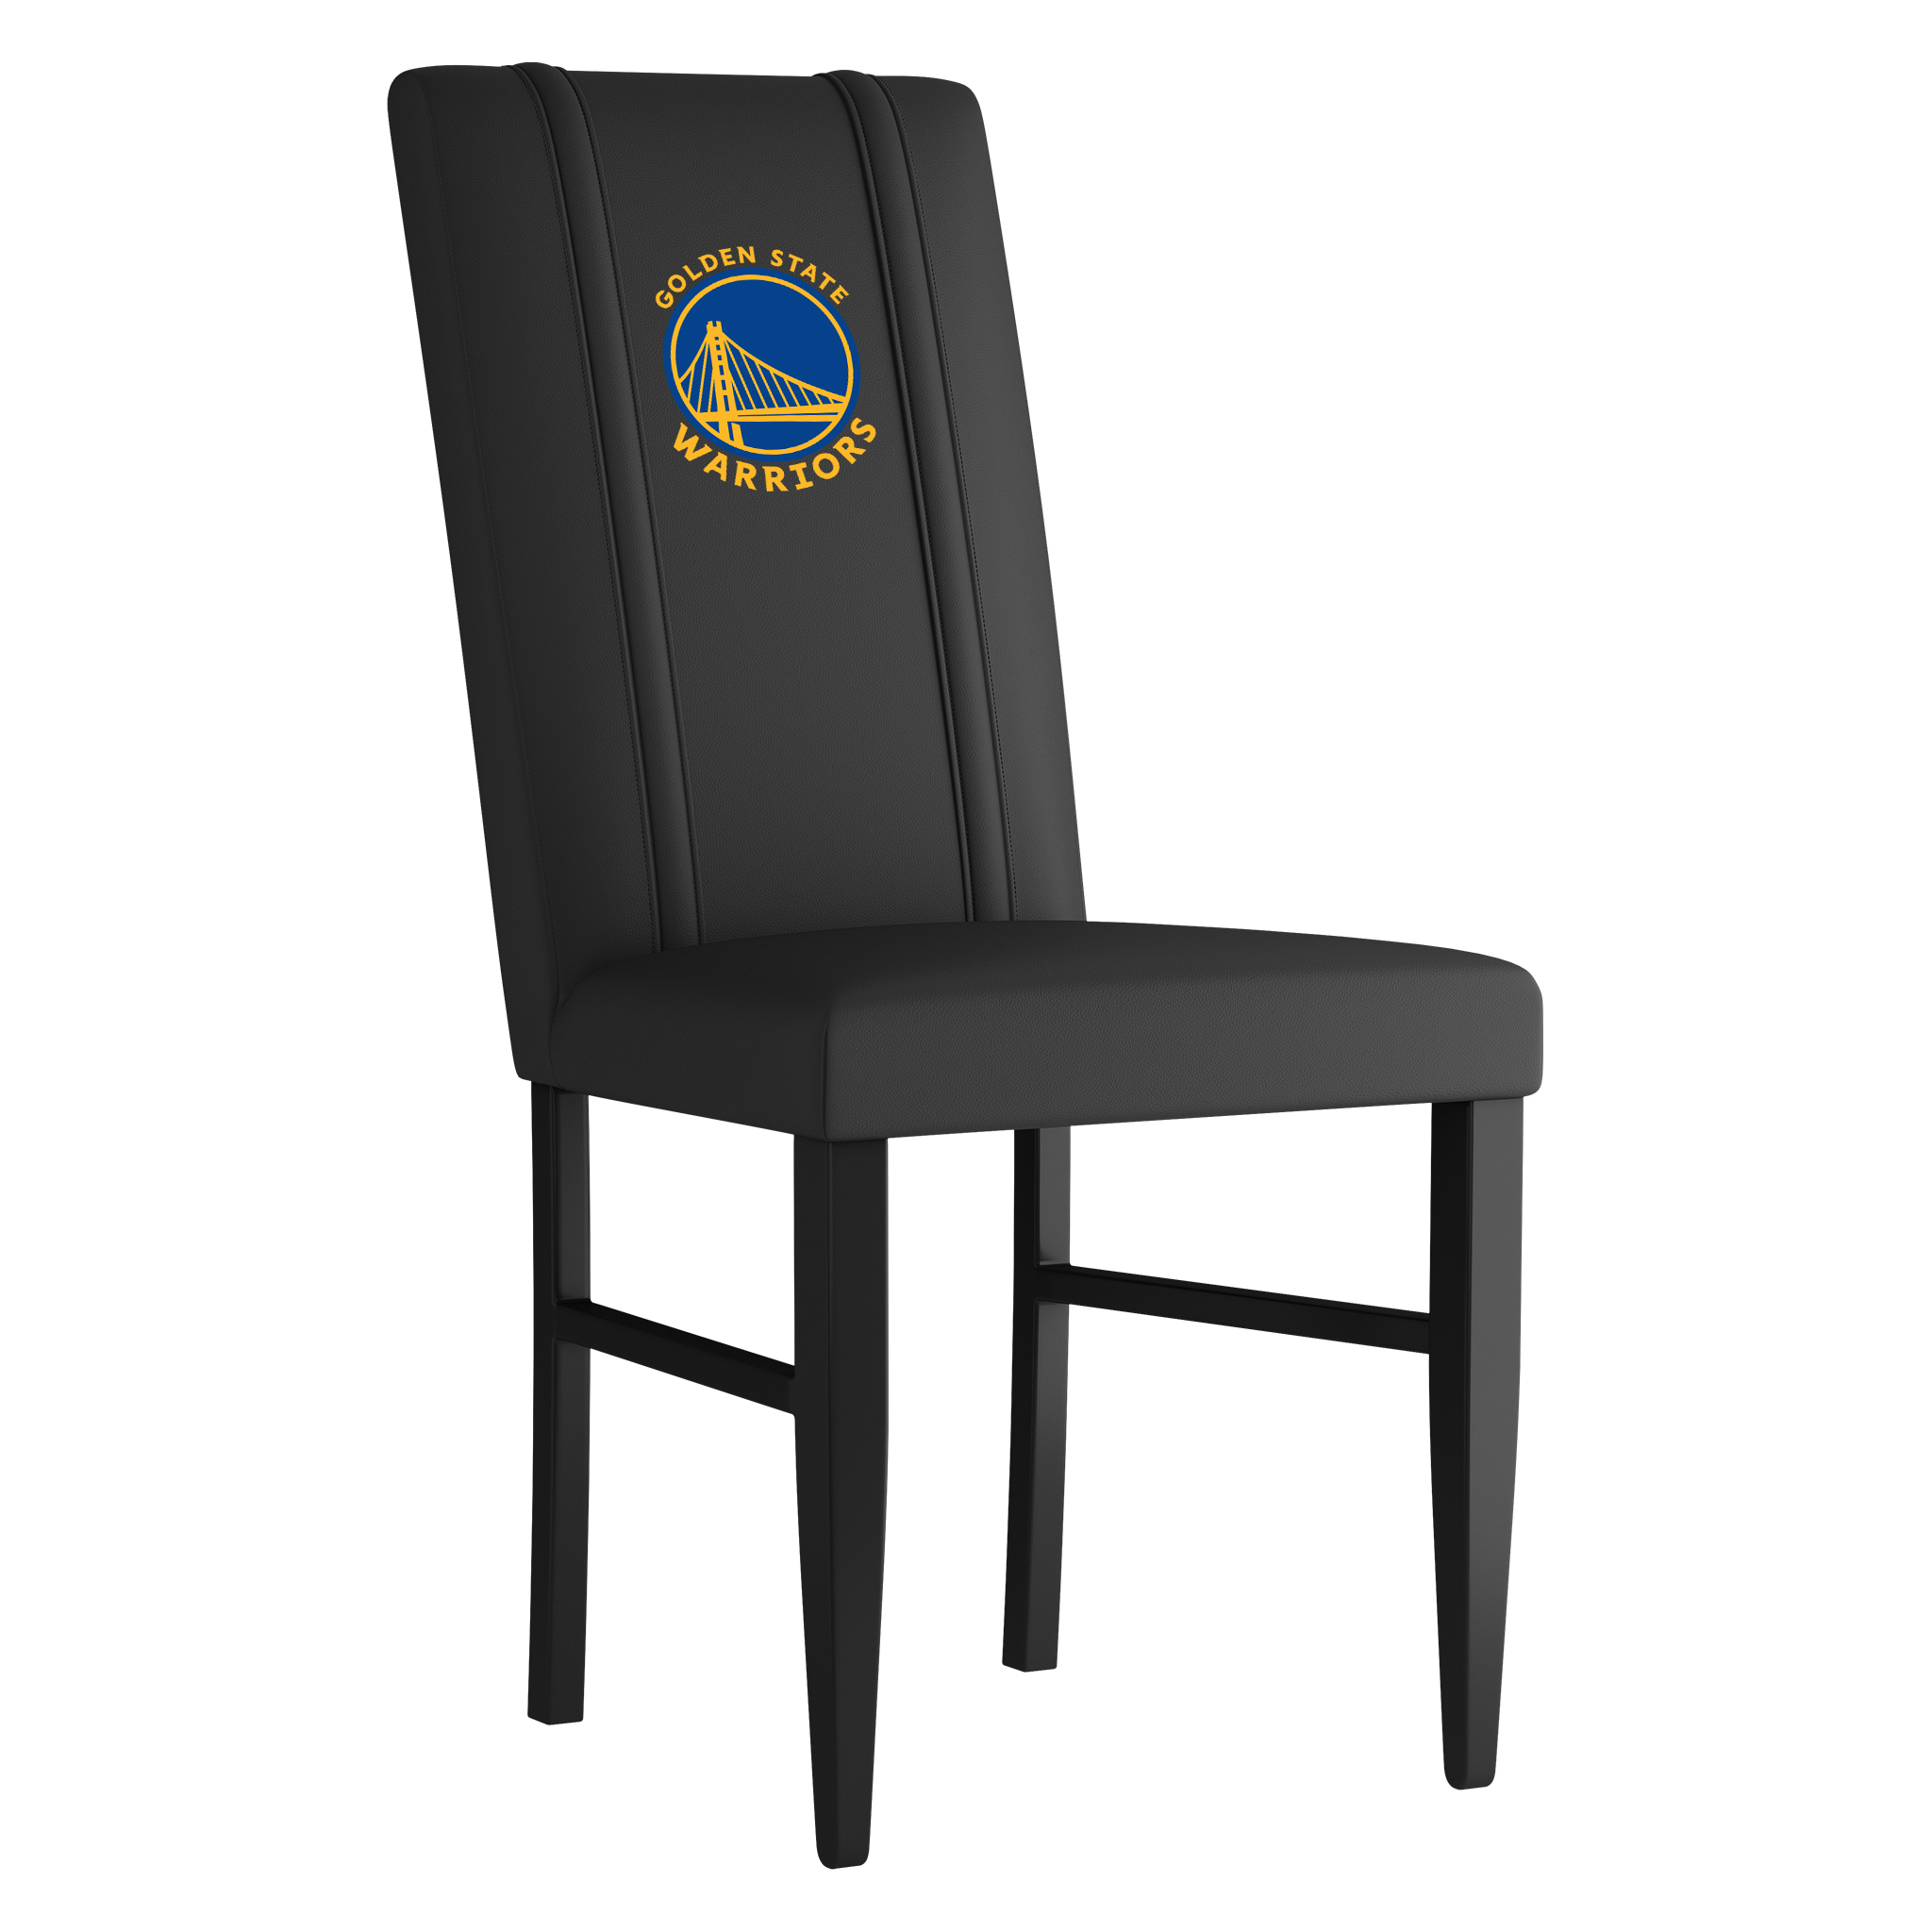 Golden State Warriors Side Chair 2000 With Golden State Warriors Global Logo